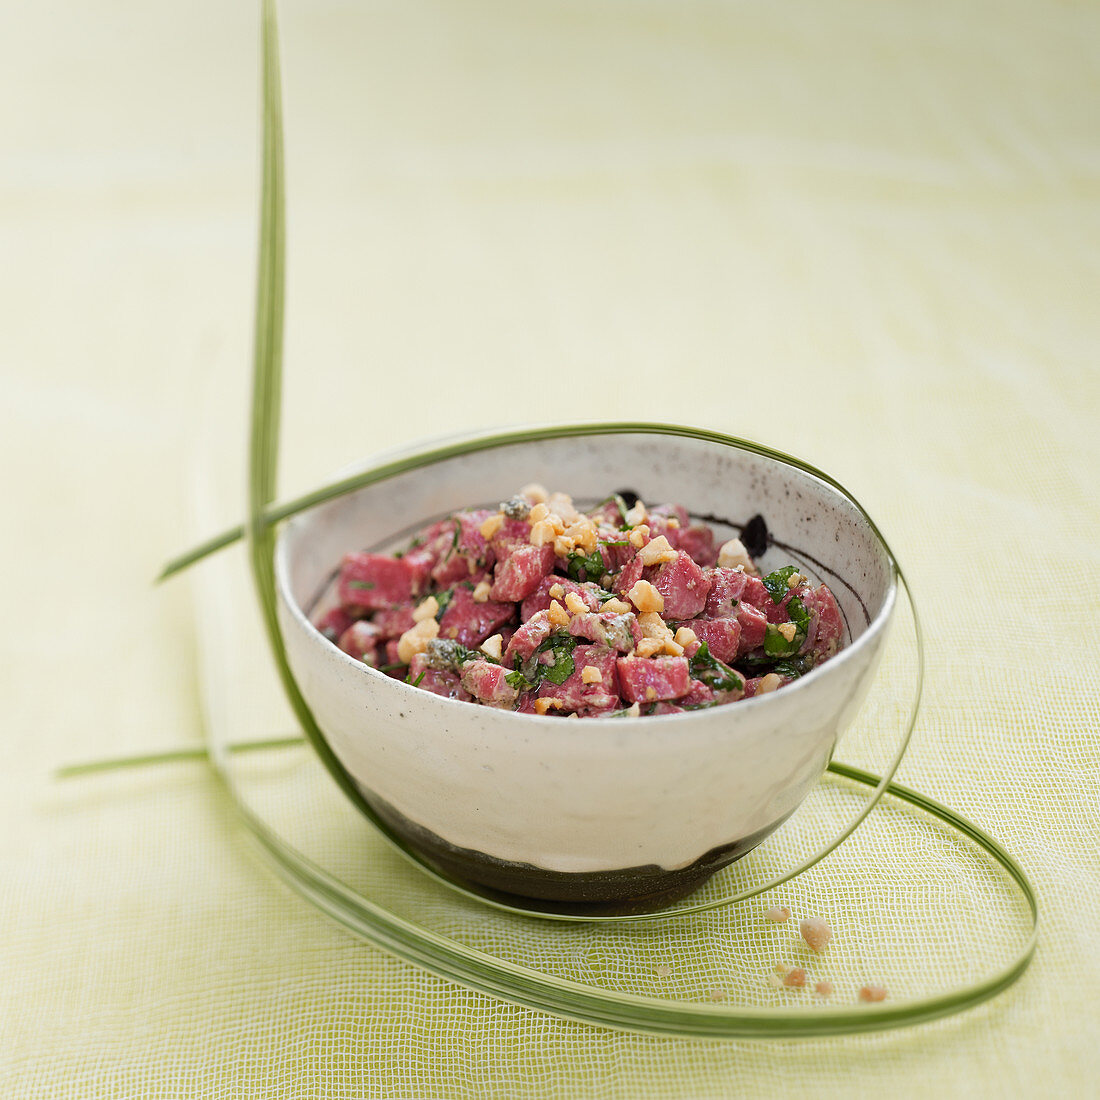 Duck tartare with peanuts